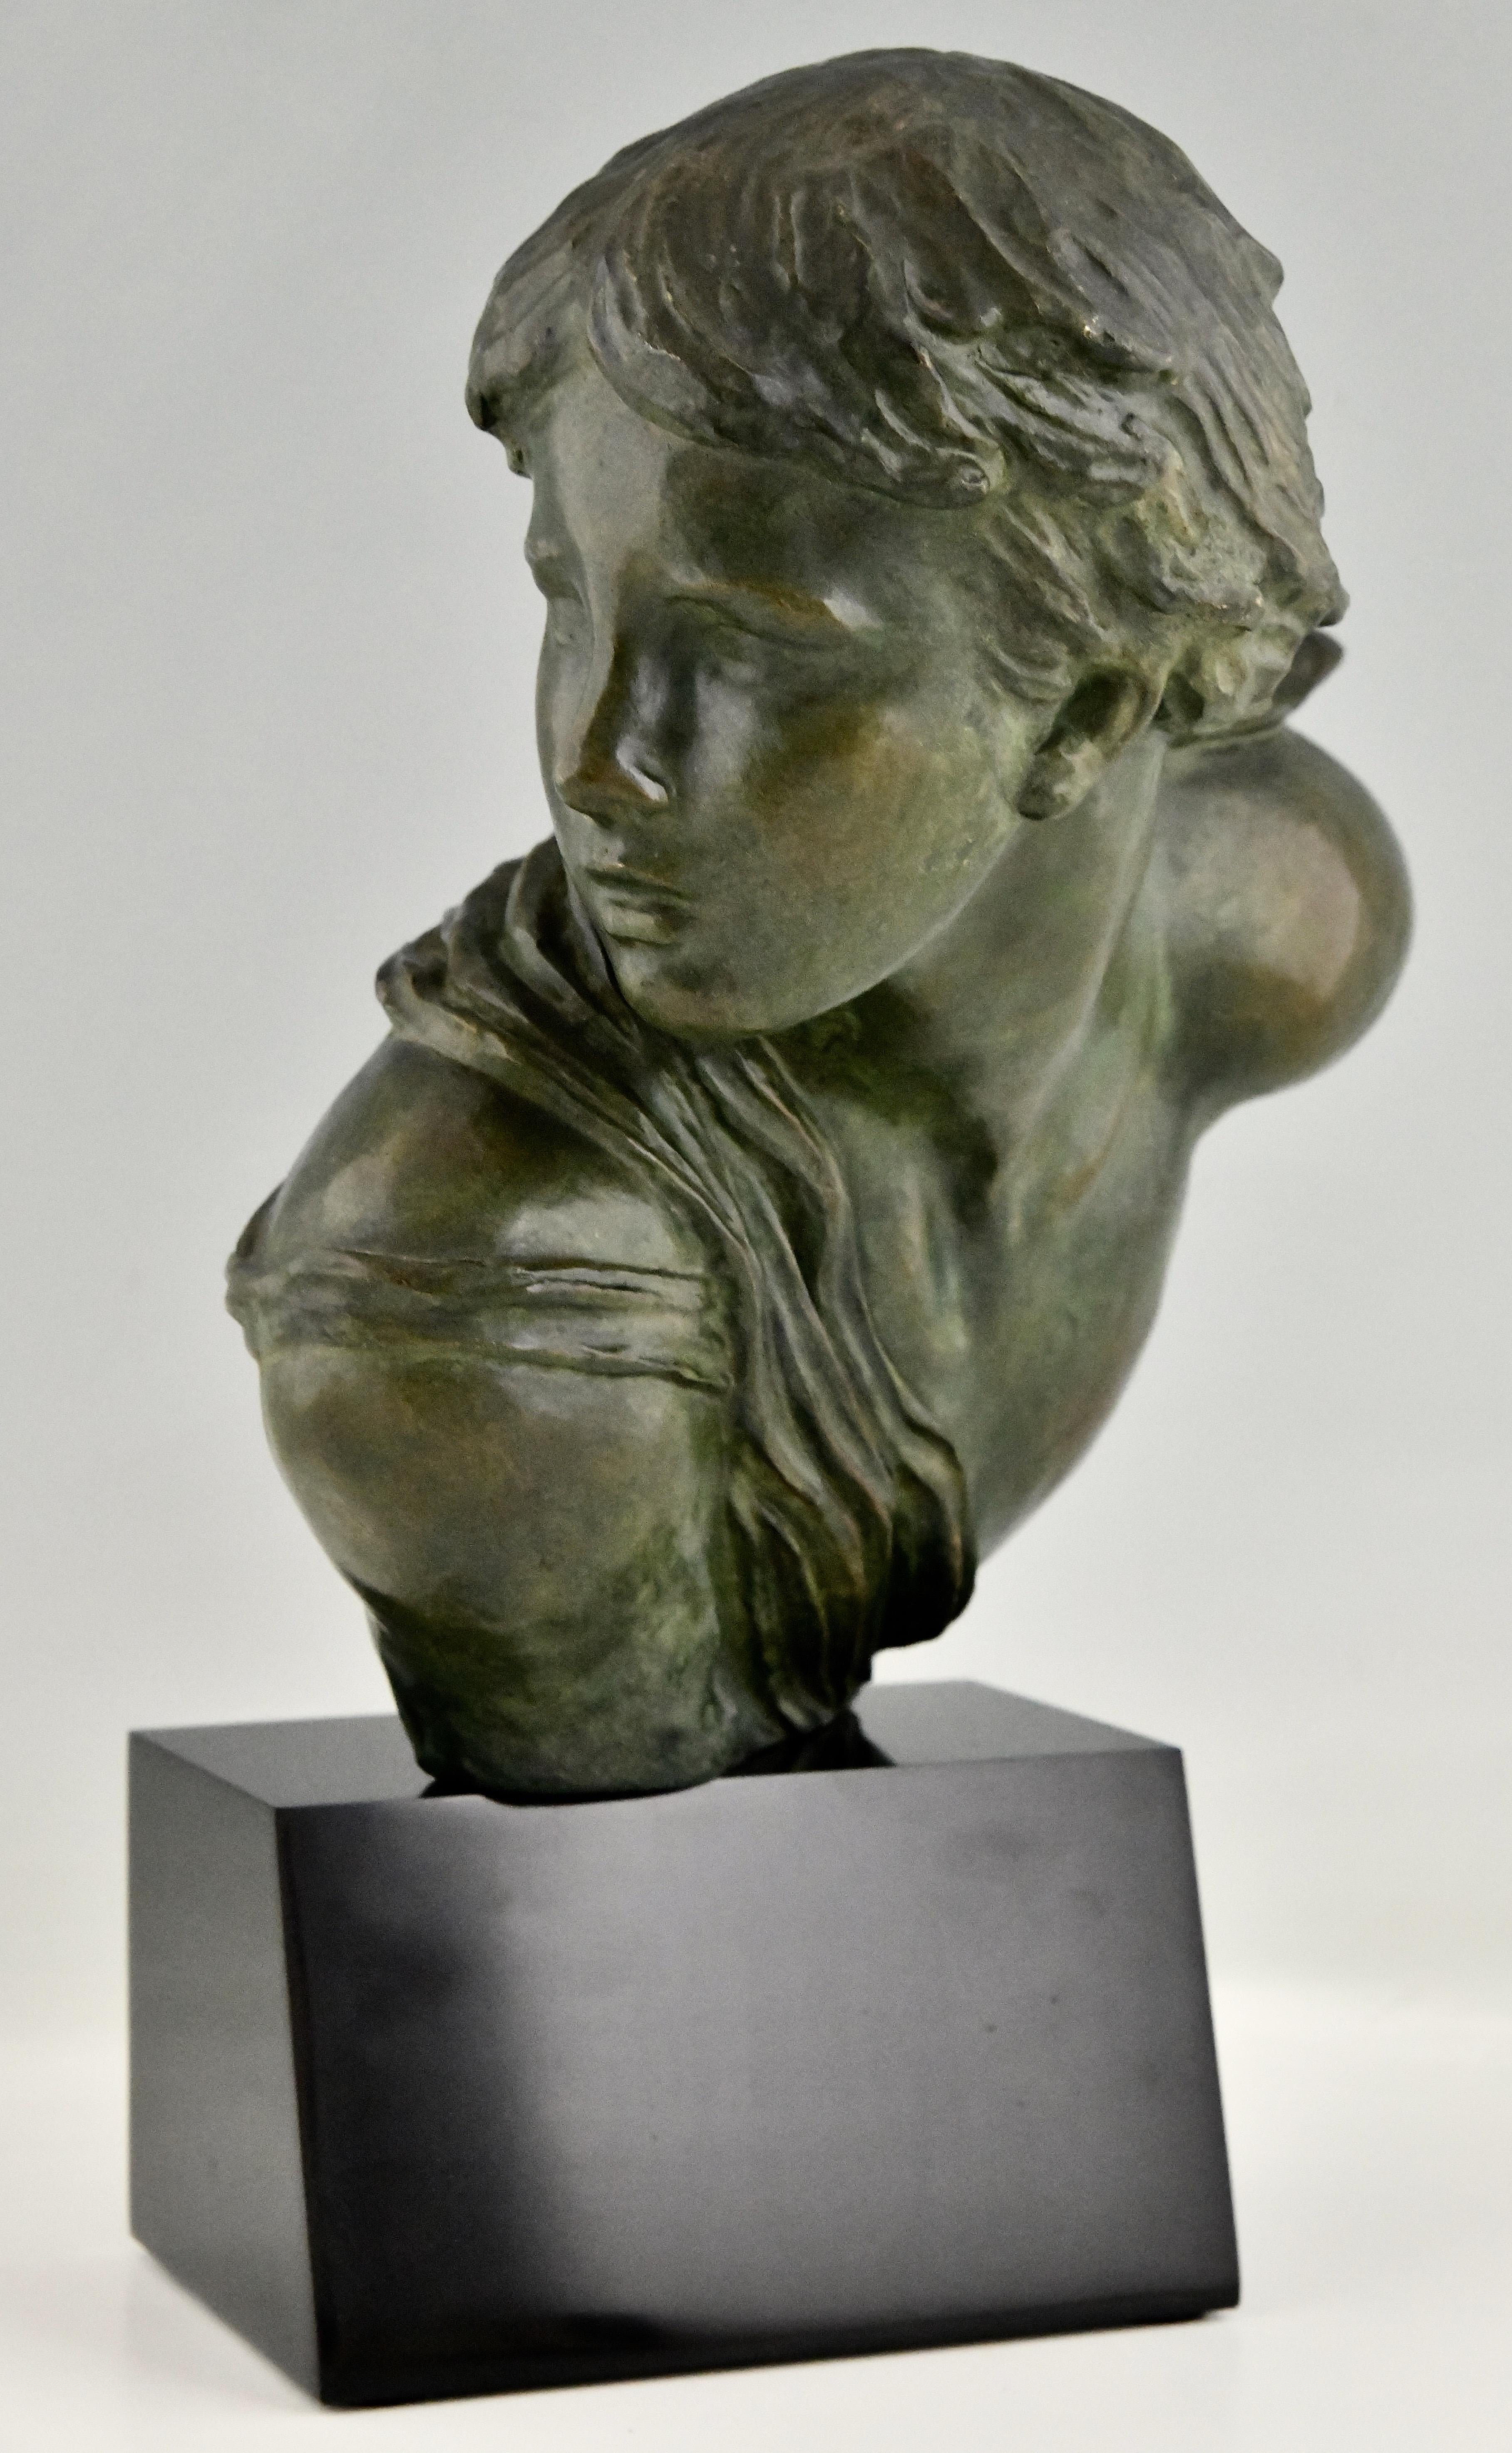 Art Deco bronze sculpture bust of a boy by Alexandre Kelety.
With the Les Neveux de Lehmann foundry mark.
Marked Bronze and numbered
France 1930. 
The sculpture can be turned on the base. 
Literature:
Statuettes of the Art Deco period, Alberto